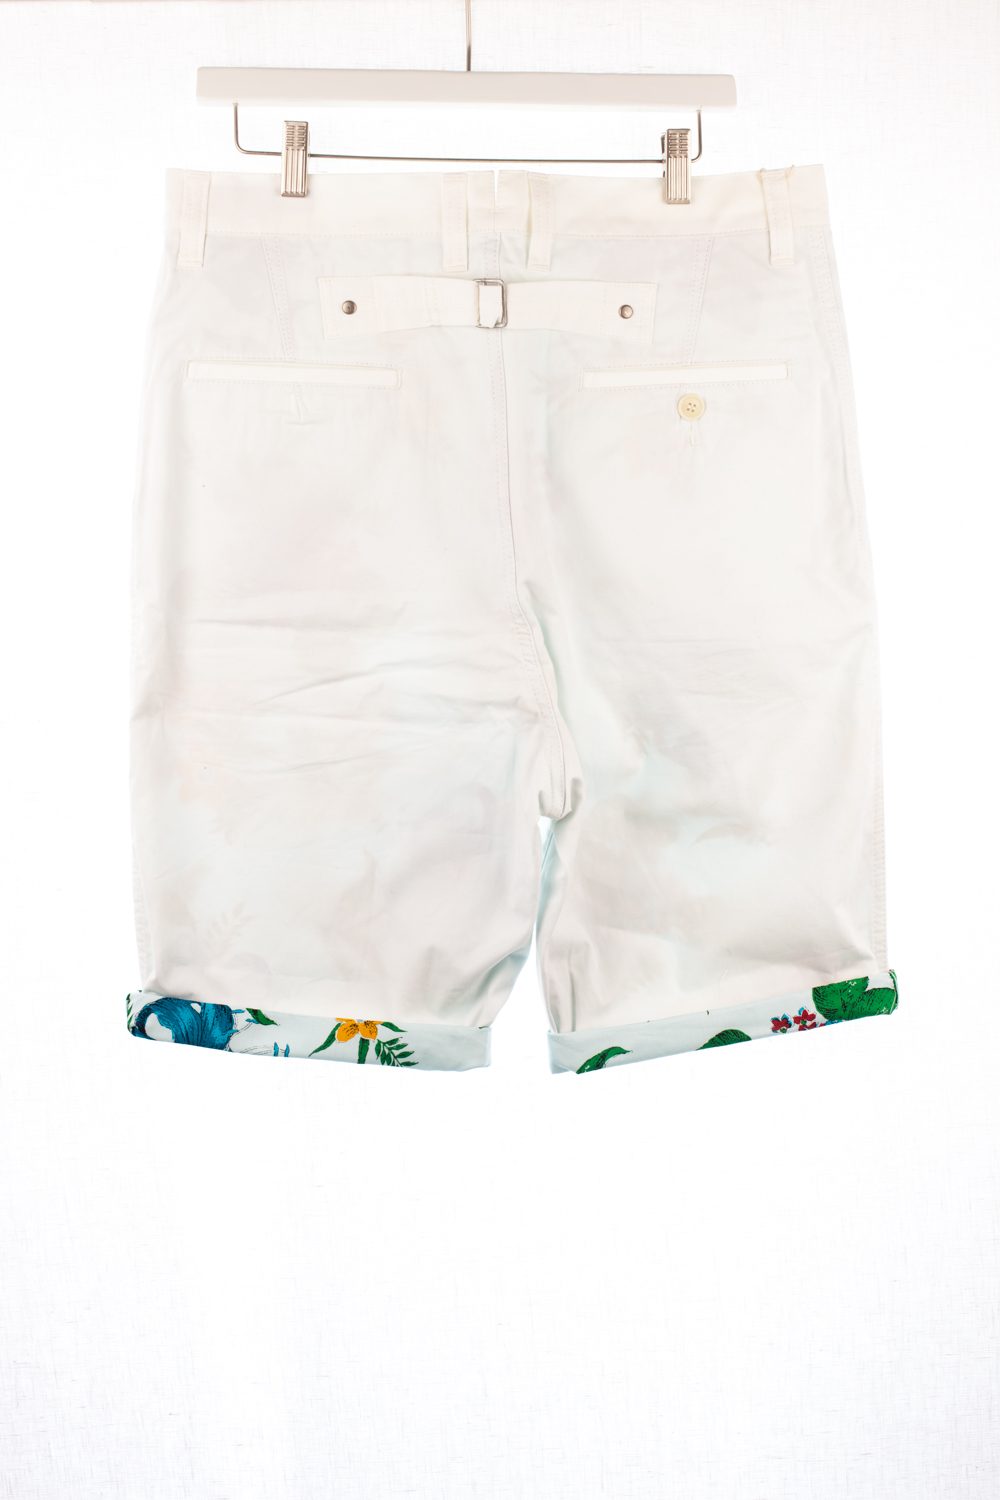 NWT SS14 Floral Lined “Work” Shorts